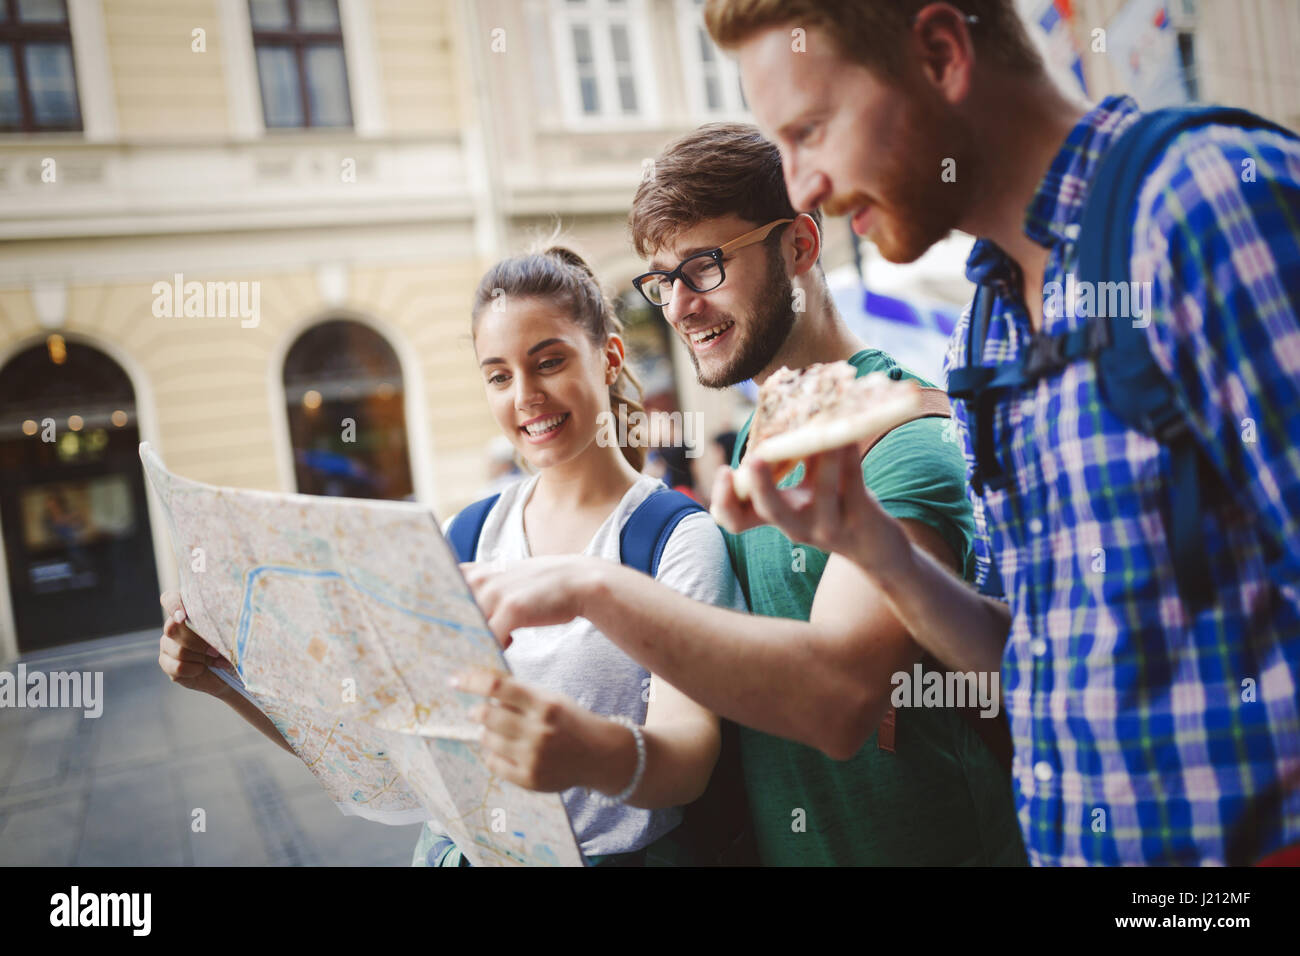 Young happy tourists holding map sightseeing in city Stock Photo